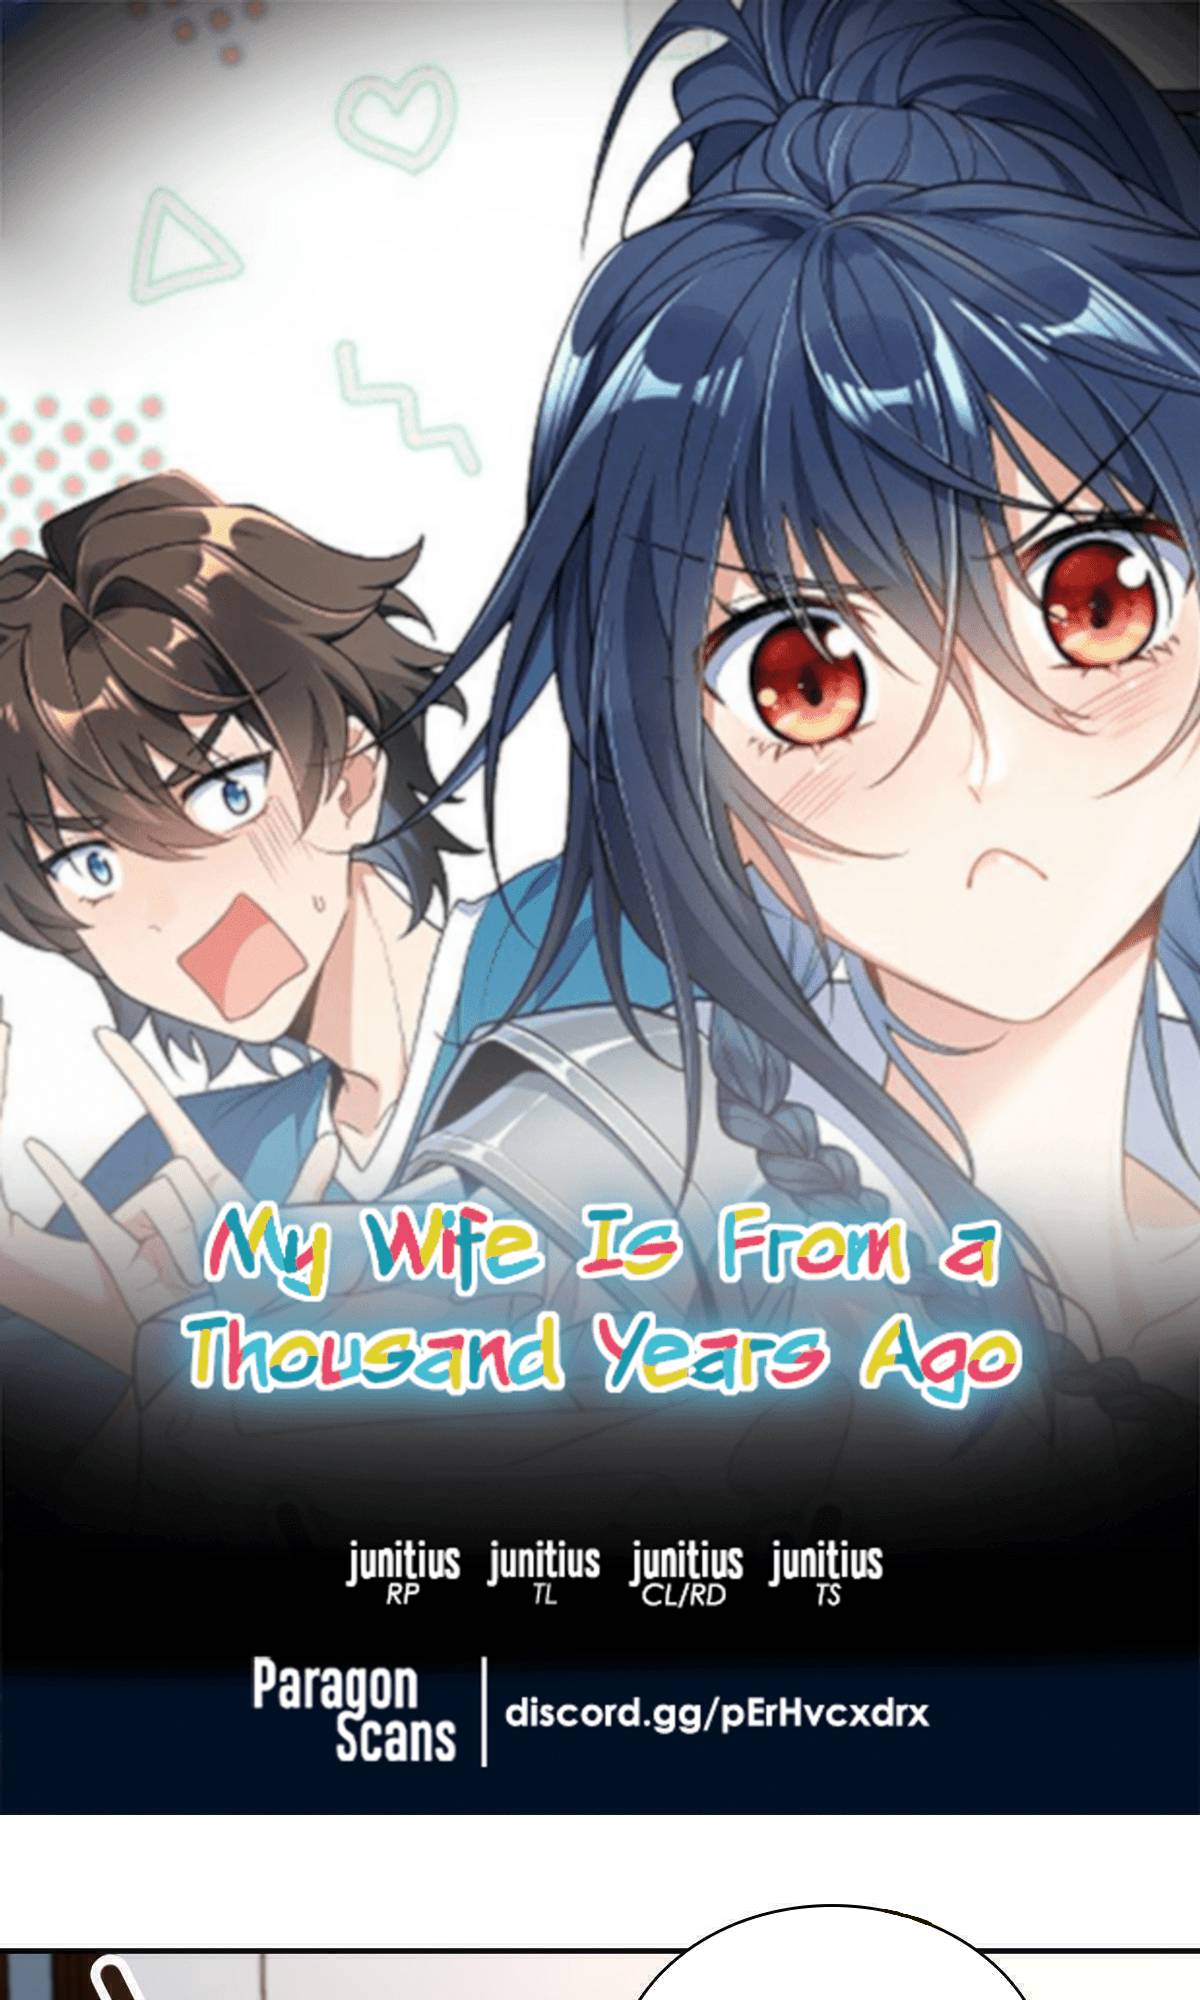 Read My Wife Is From a Thousand Years Ago Chapter 134 0